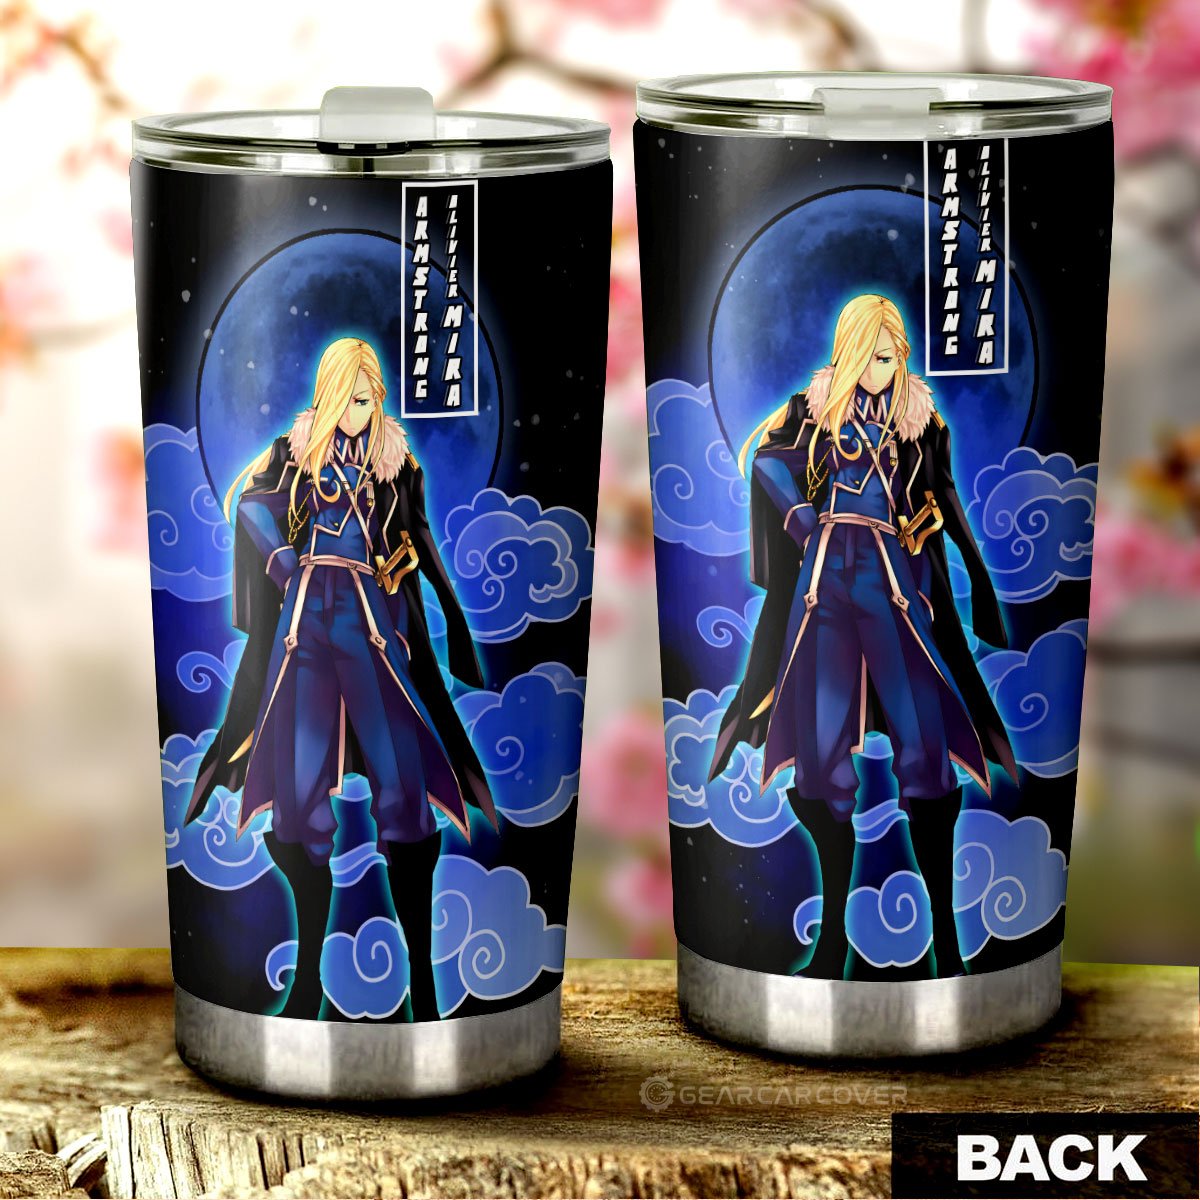 Olivier Mira Armstrong Tumbler Cup Custom Fullmetal Alchemist Anime Car Interior Accessories - Gearcarcover - 3